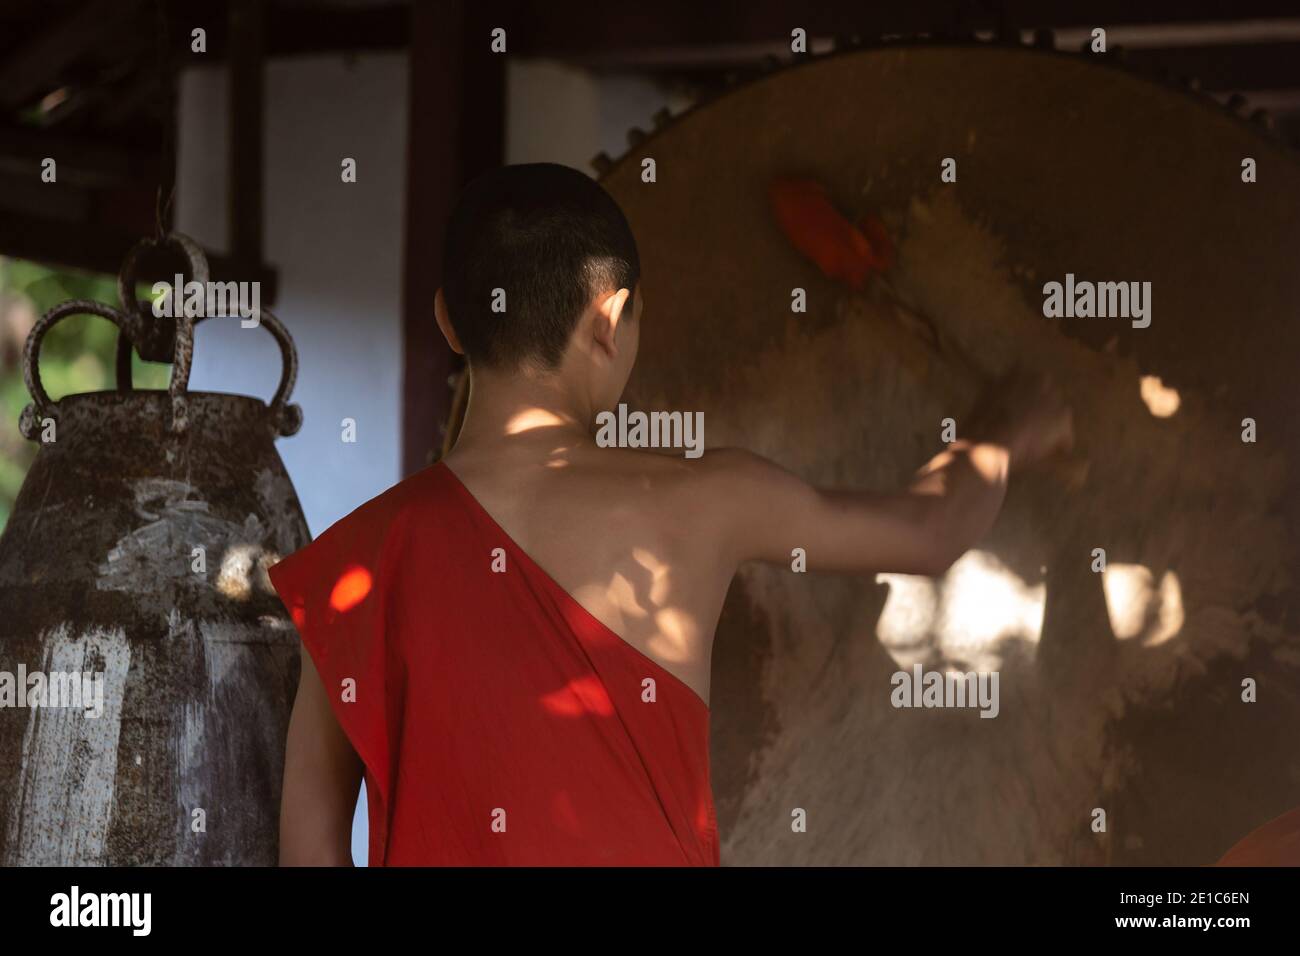 Buddhist monks on everyday morning traditional alms giving in Luang Prabang, Laos. Stock Photo